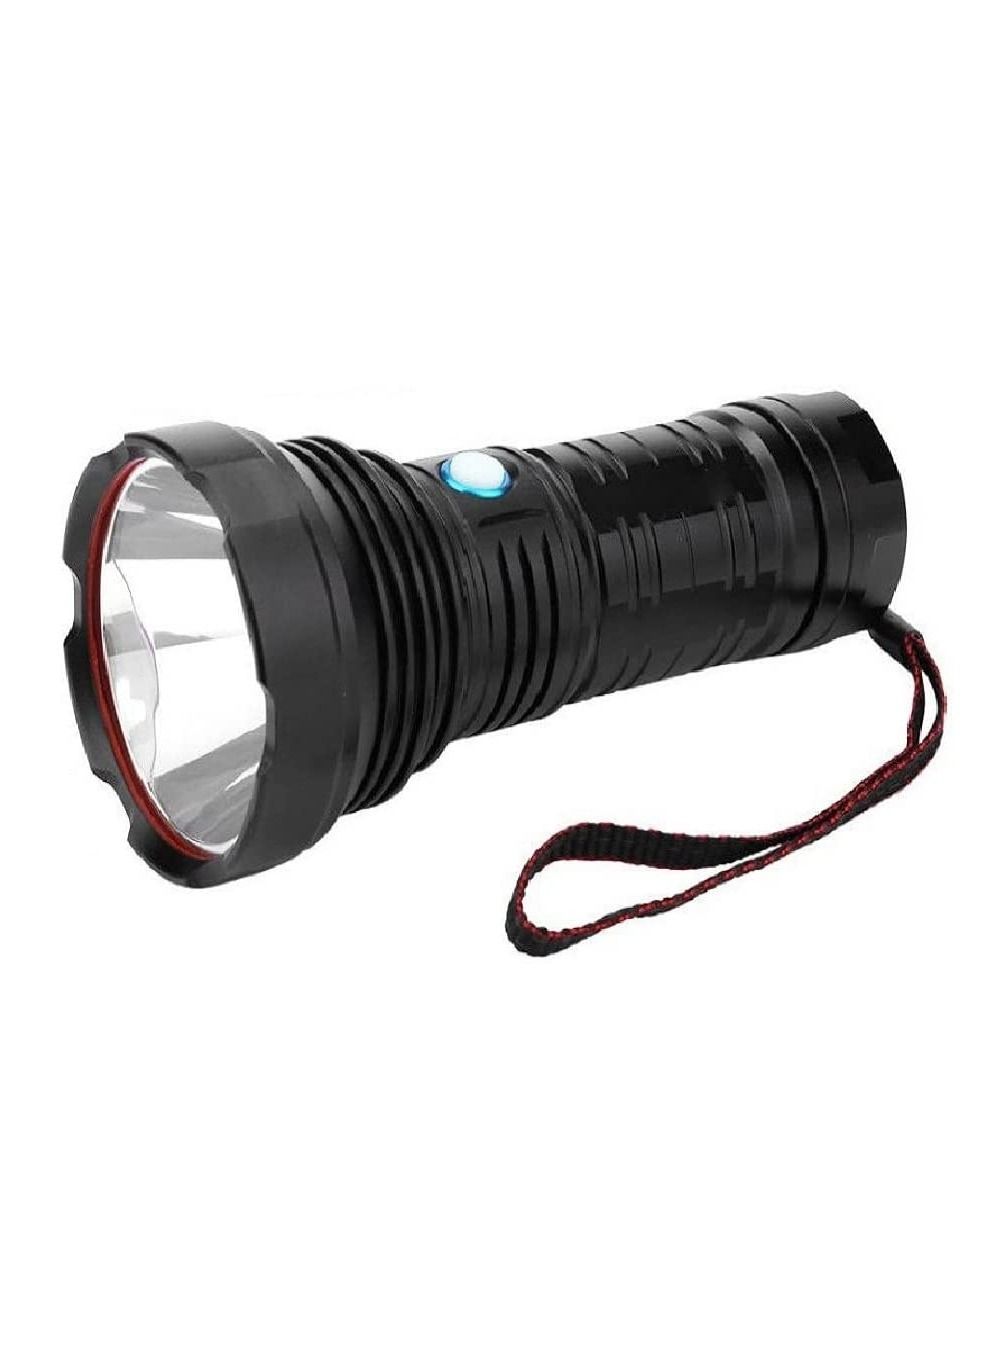 Waterproof flashlight with  super bright LED lights with three lighting modes suitable for outdoor adventures